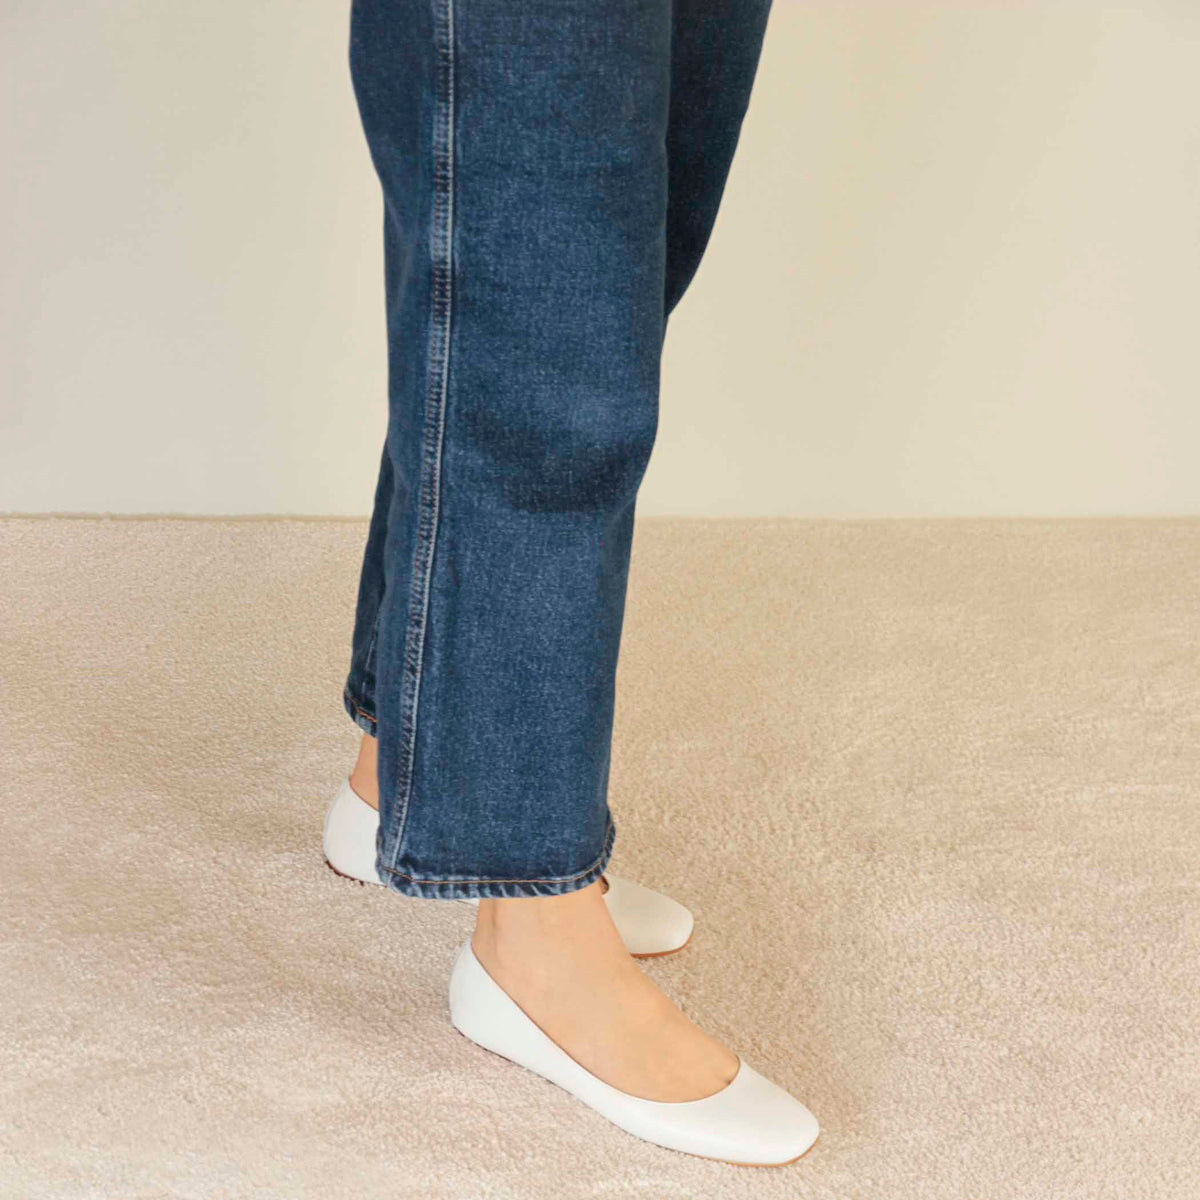 Handmade women's casual ballet flat in white smooth leather